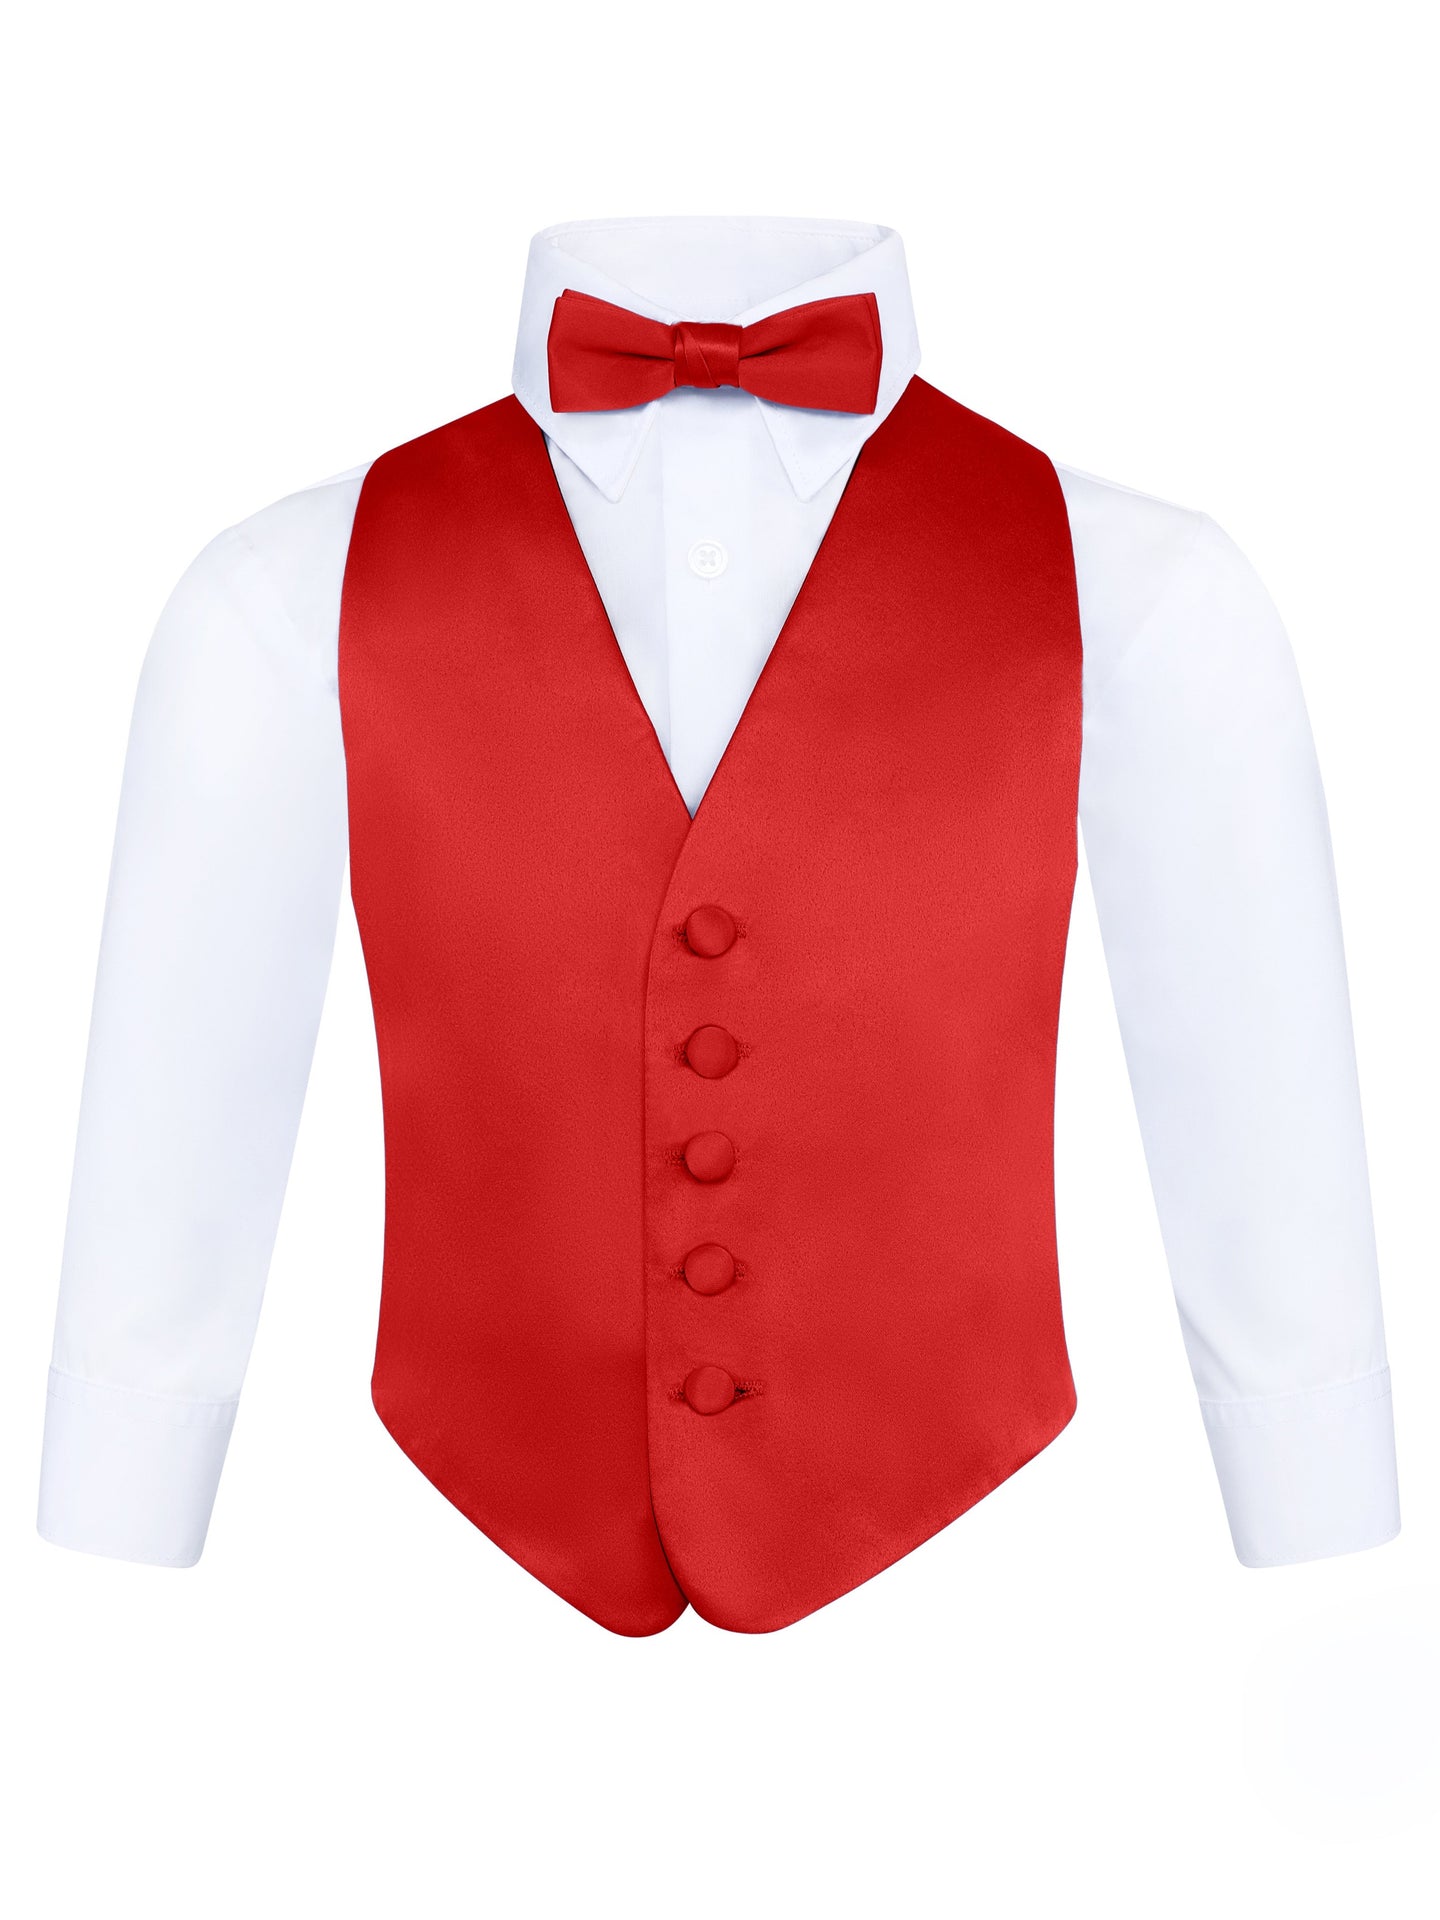 S.H. Churchill & Co. Boy's 3 Piece Red Backless Formal Vest Set - Includes Vest, Bow Tie, Pocket Square for Tuxedo or Suit